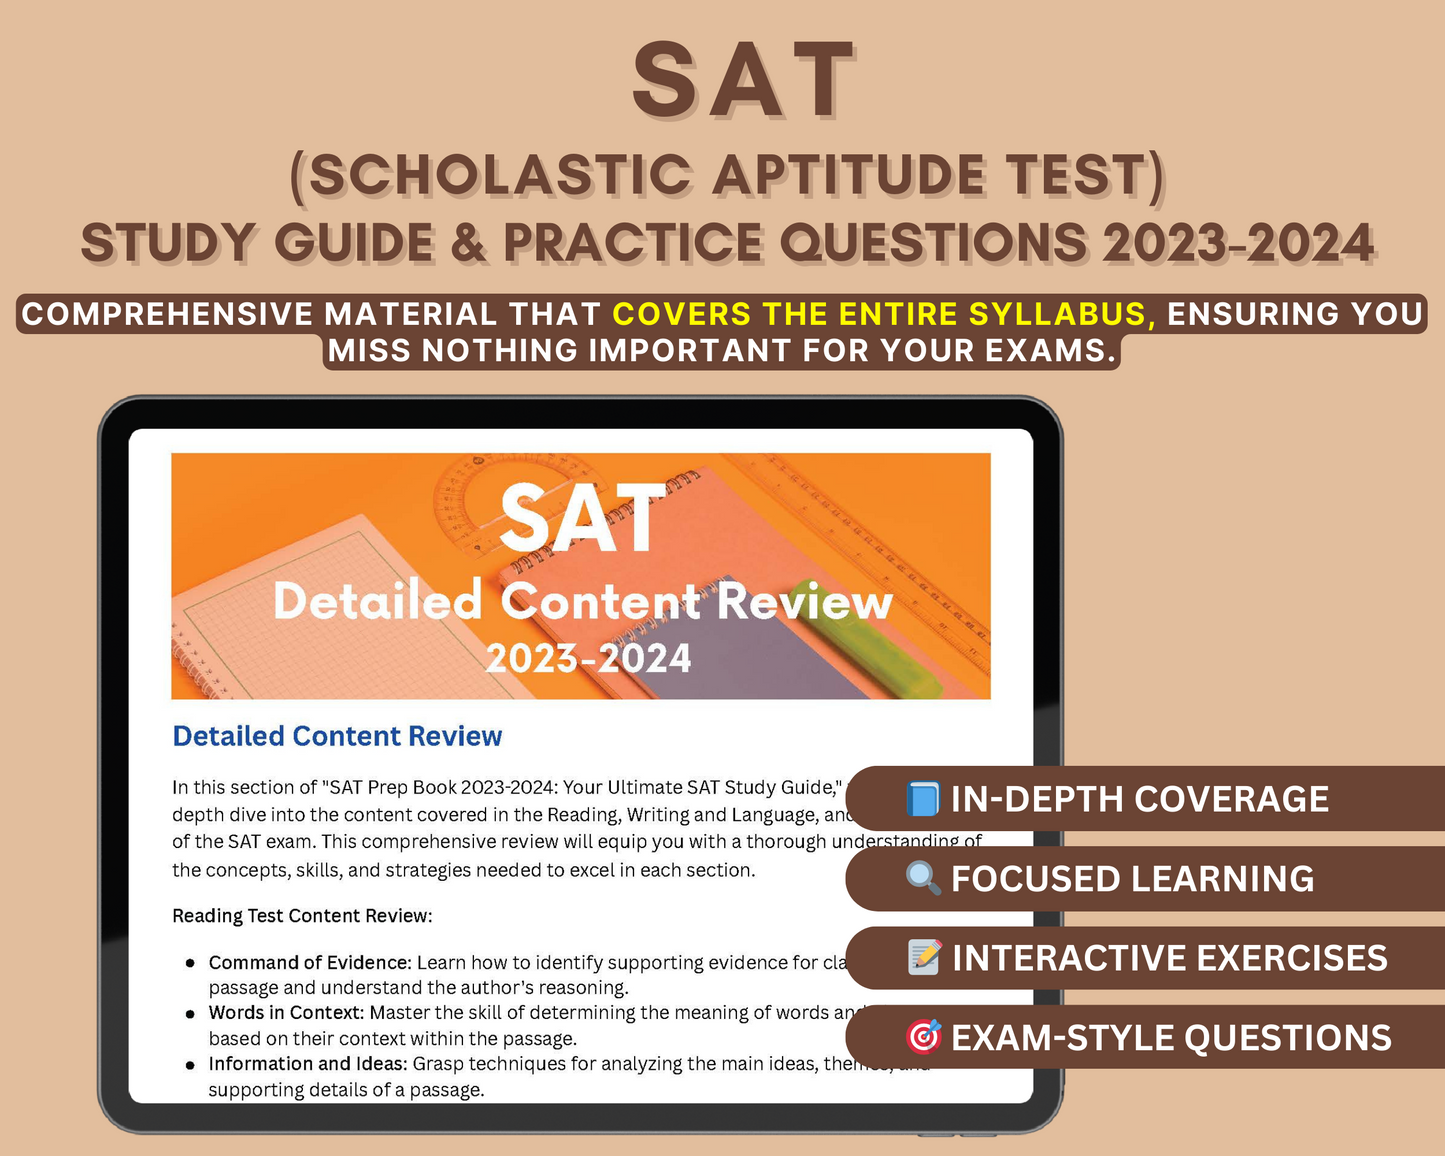 SAT Exam Prep 2023-2024: Comprehensive Study Guide with In-Depth Content Review, Practice Tests & Exam Strategies